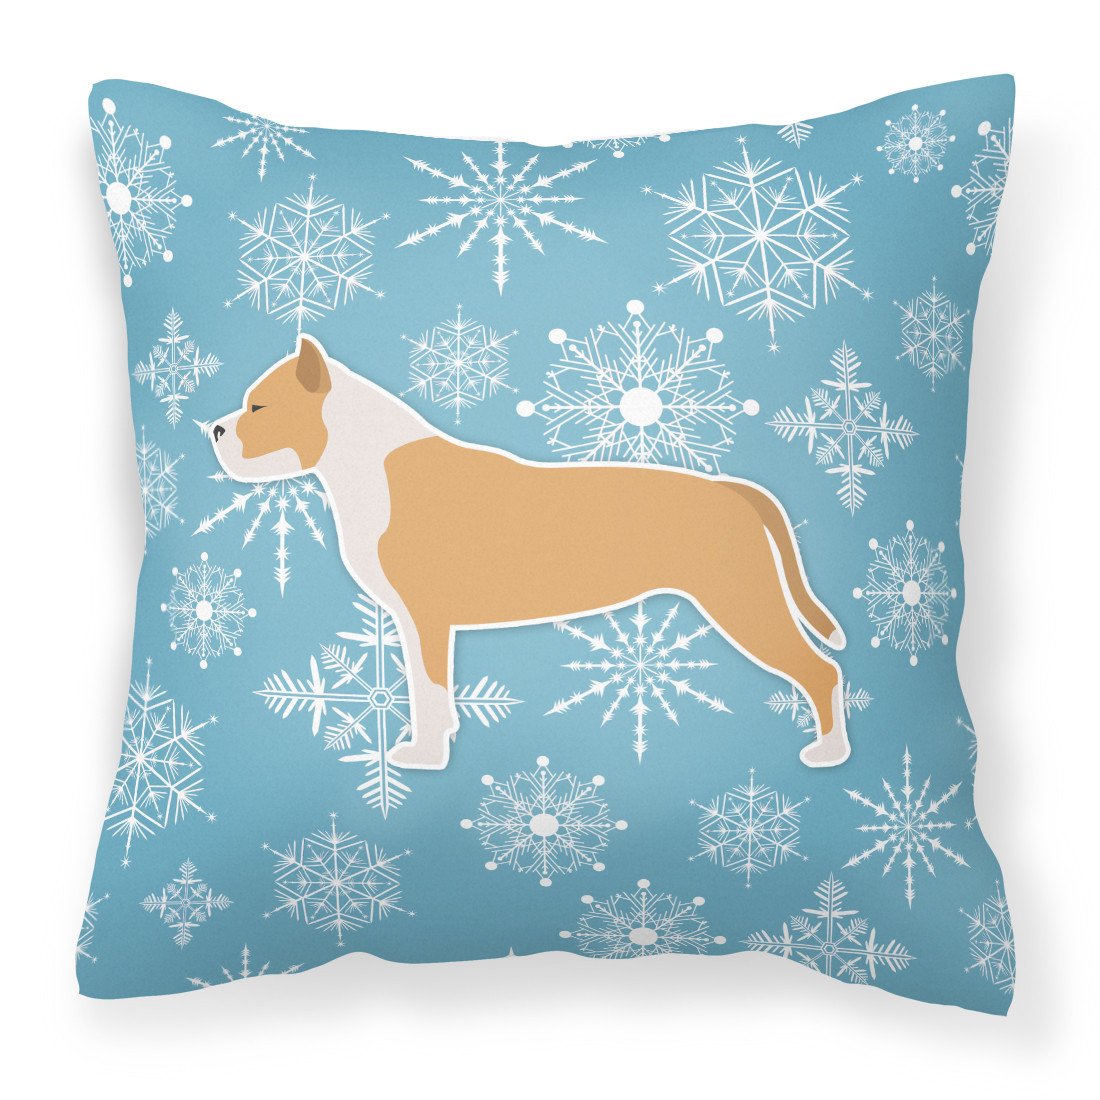 Winter Snowflake Staffordshire Bull Terrier Fabric Decorative Pillow BB3554PW1818 by Caroline's Treasures